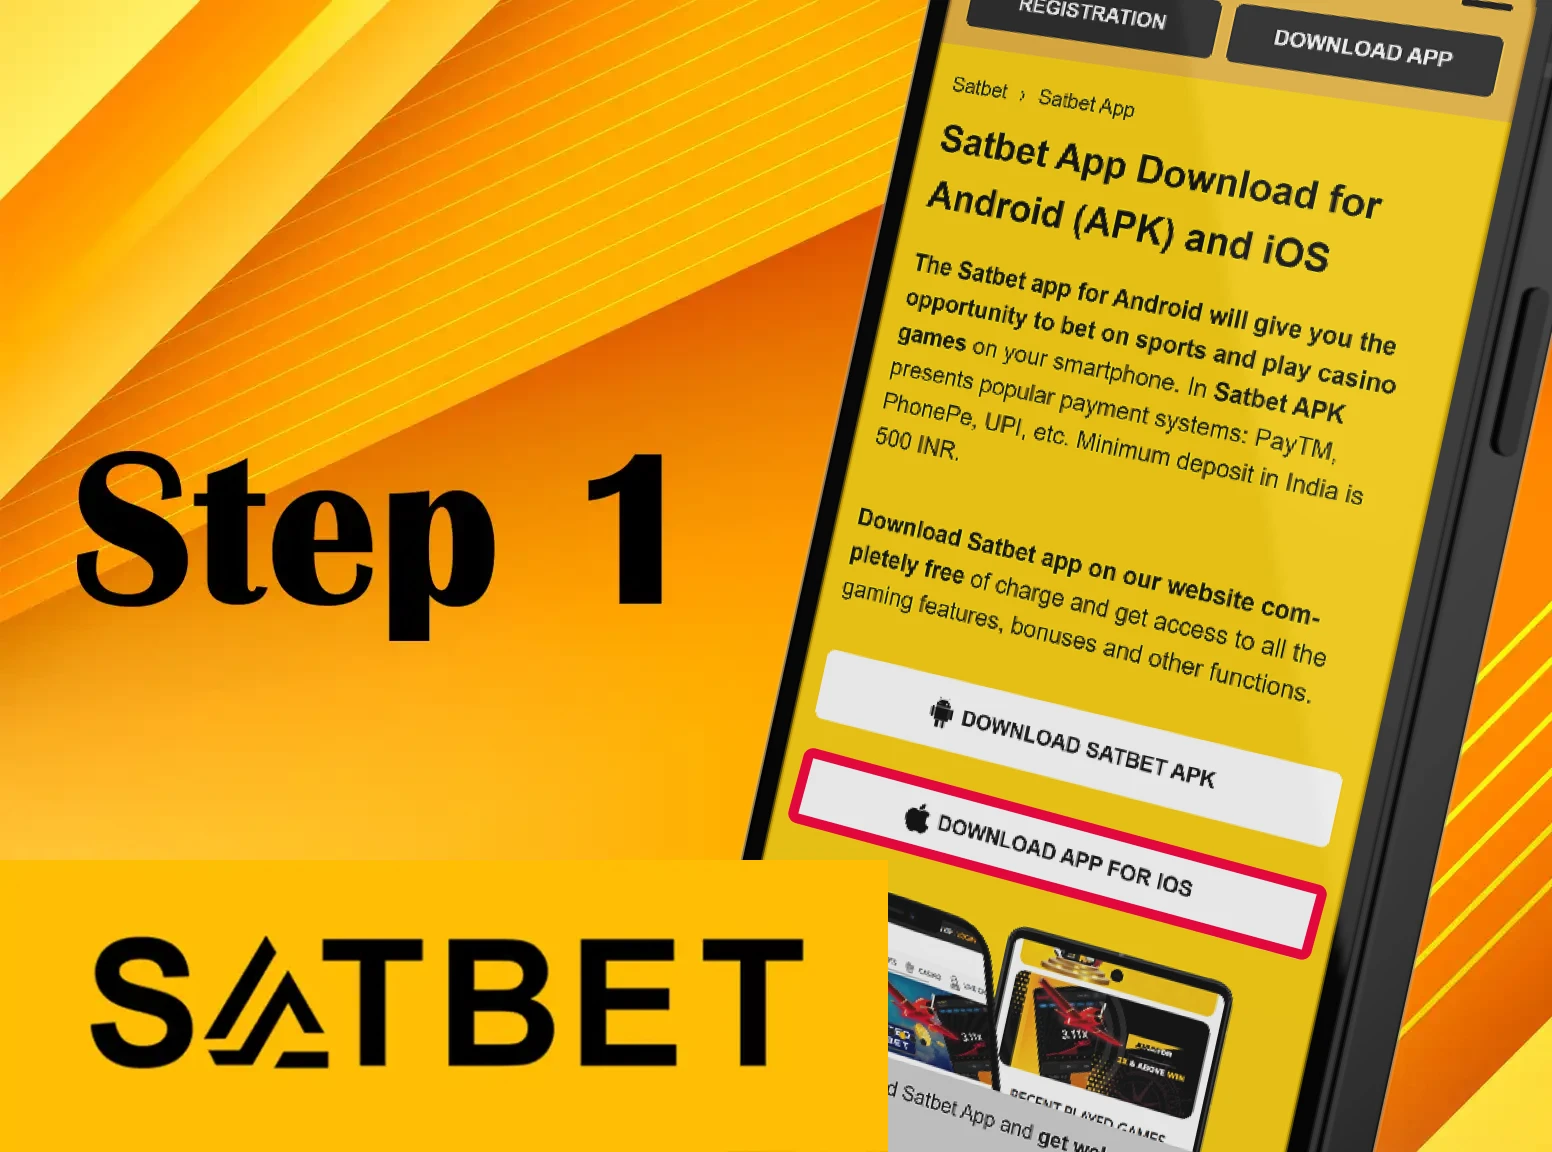 You can go to the Satbet website via the mobile browser version.